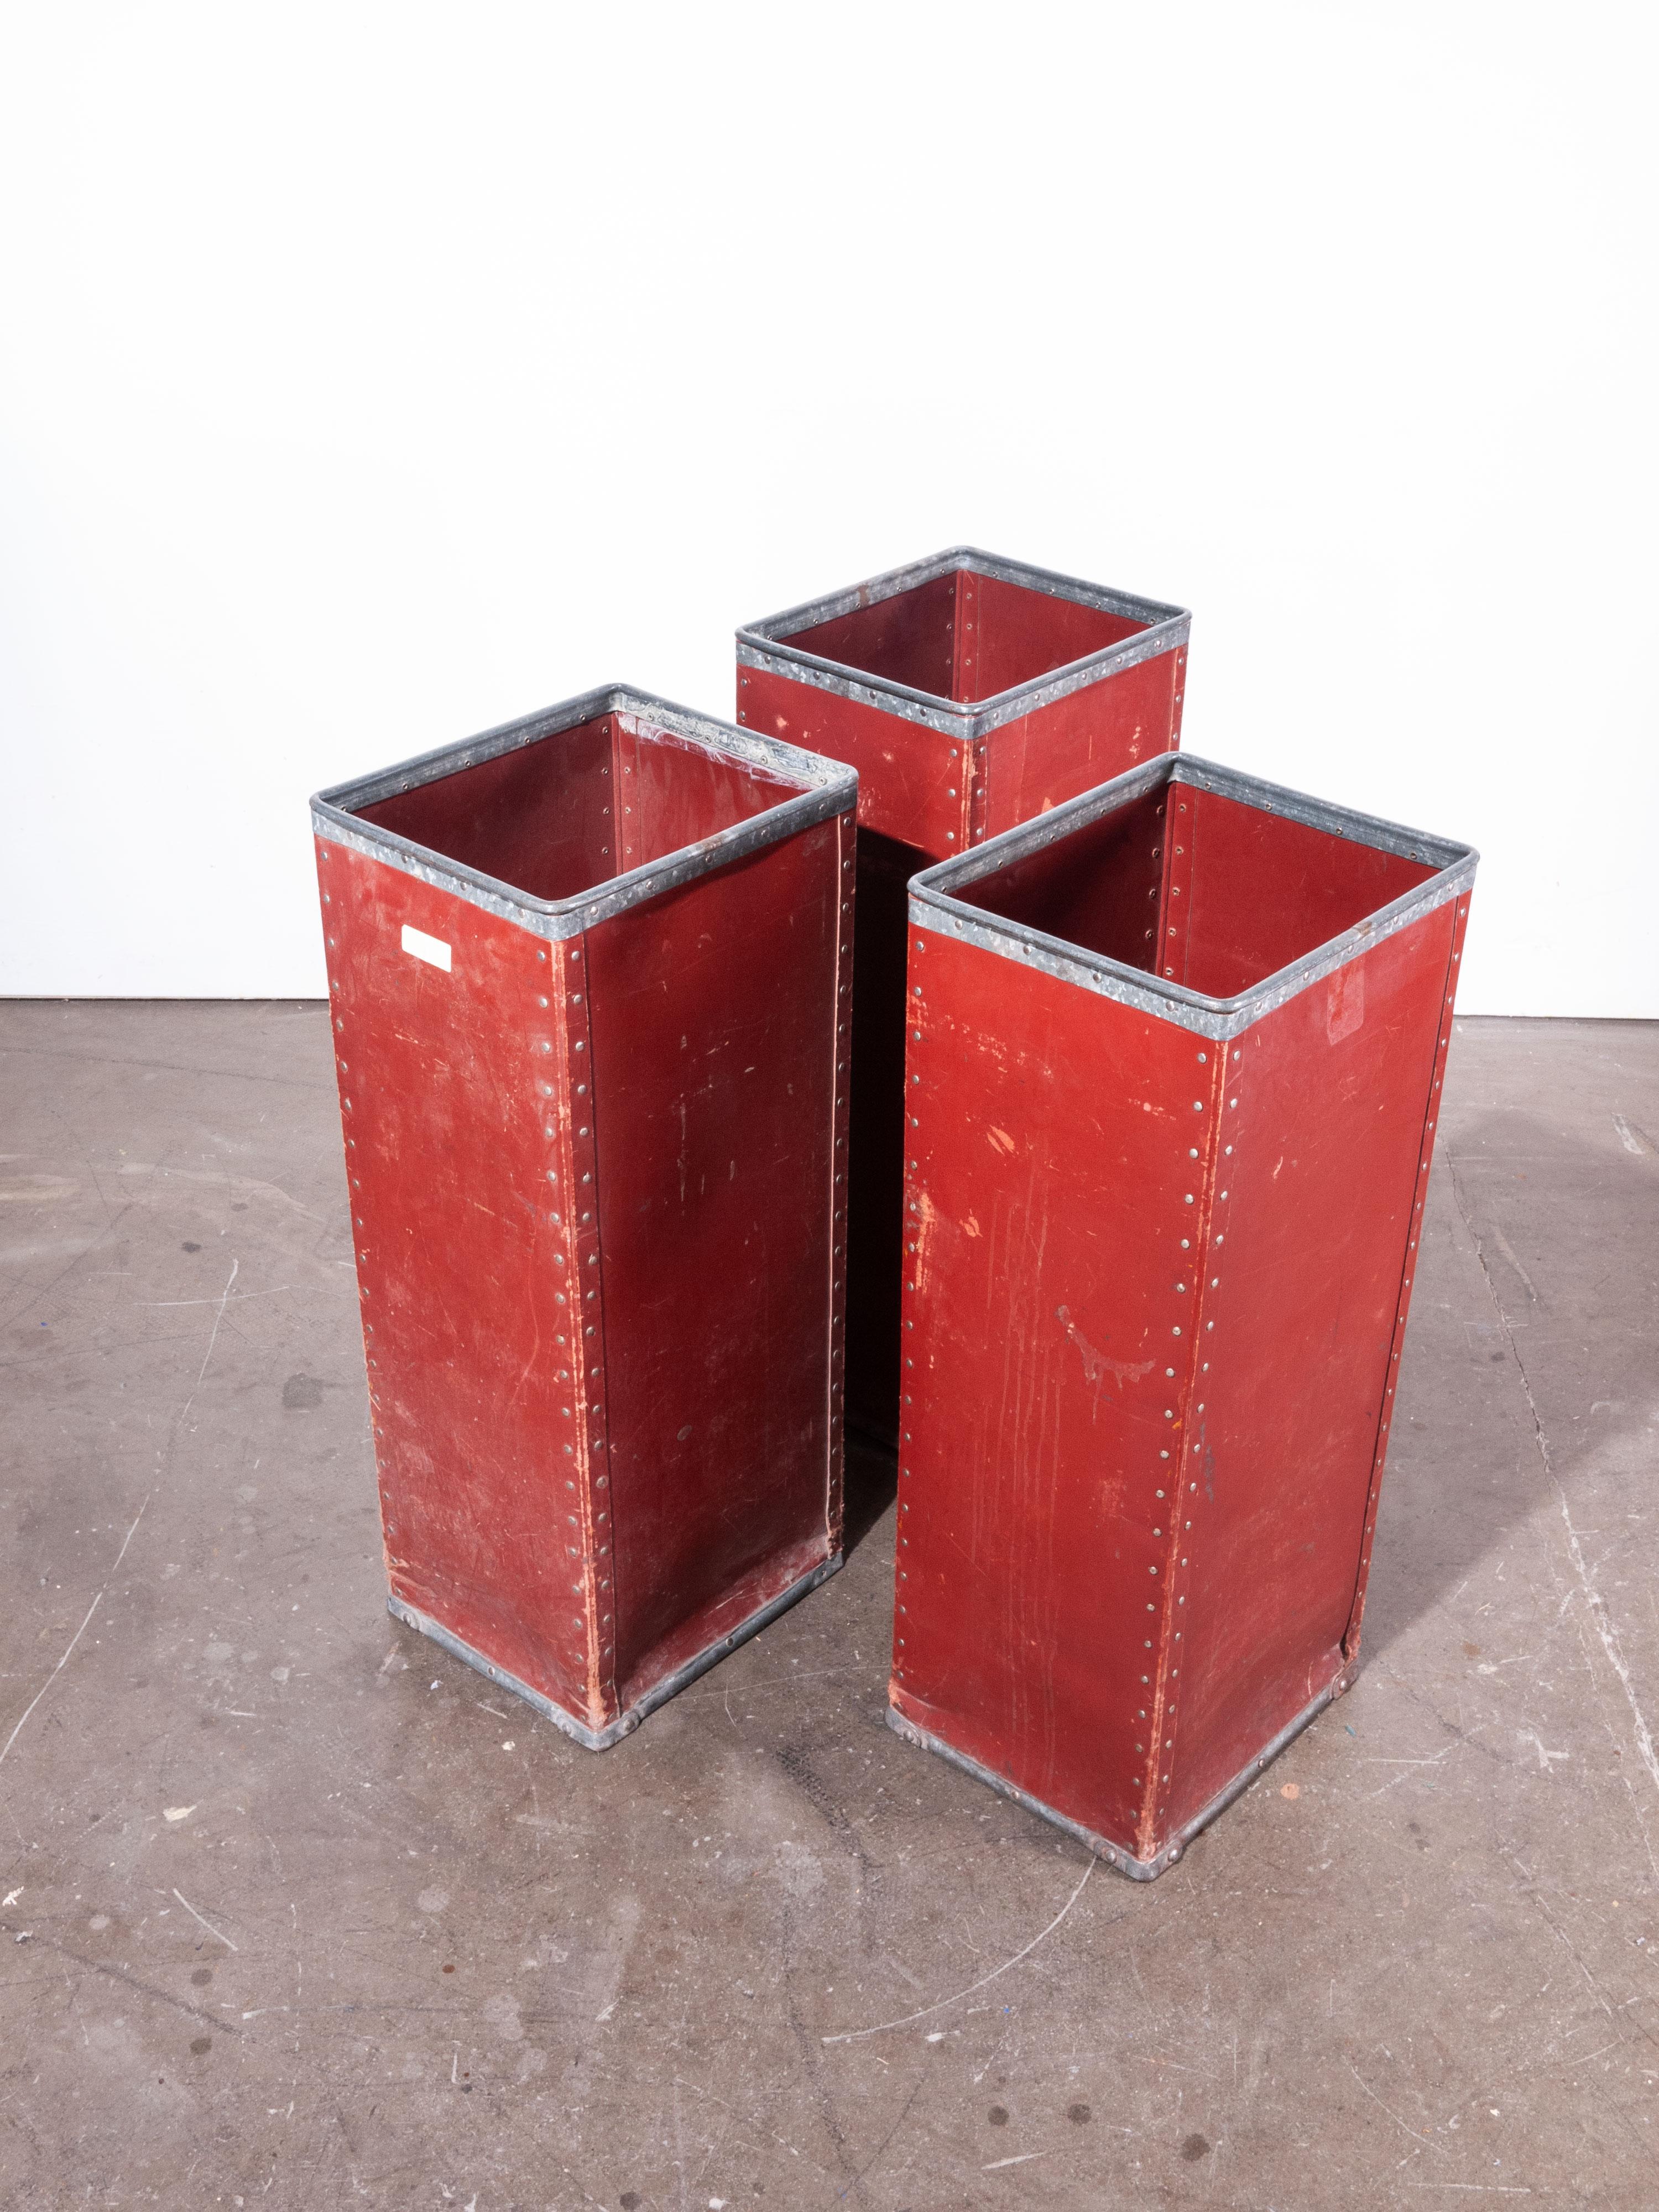 1940s original Suroy tall industrial storage boxes – One Available
1940s original Suroy tall industrial storage boxes. In 1853 the textile industrial revolution arrived in Loos, Nord France with the formation of the Esquermes factory by Alfred